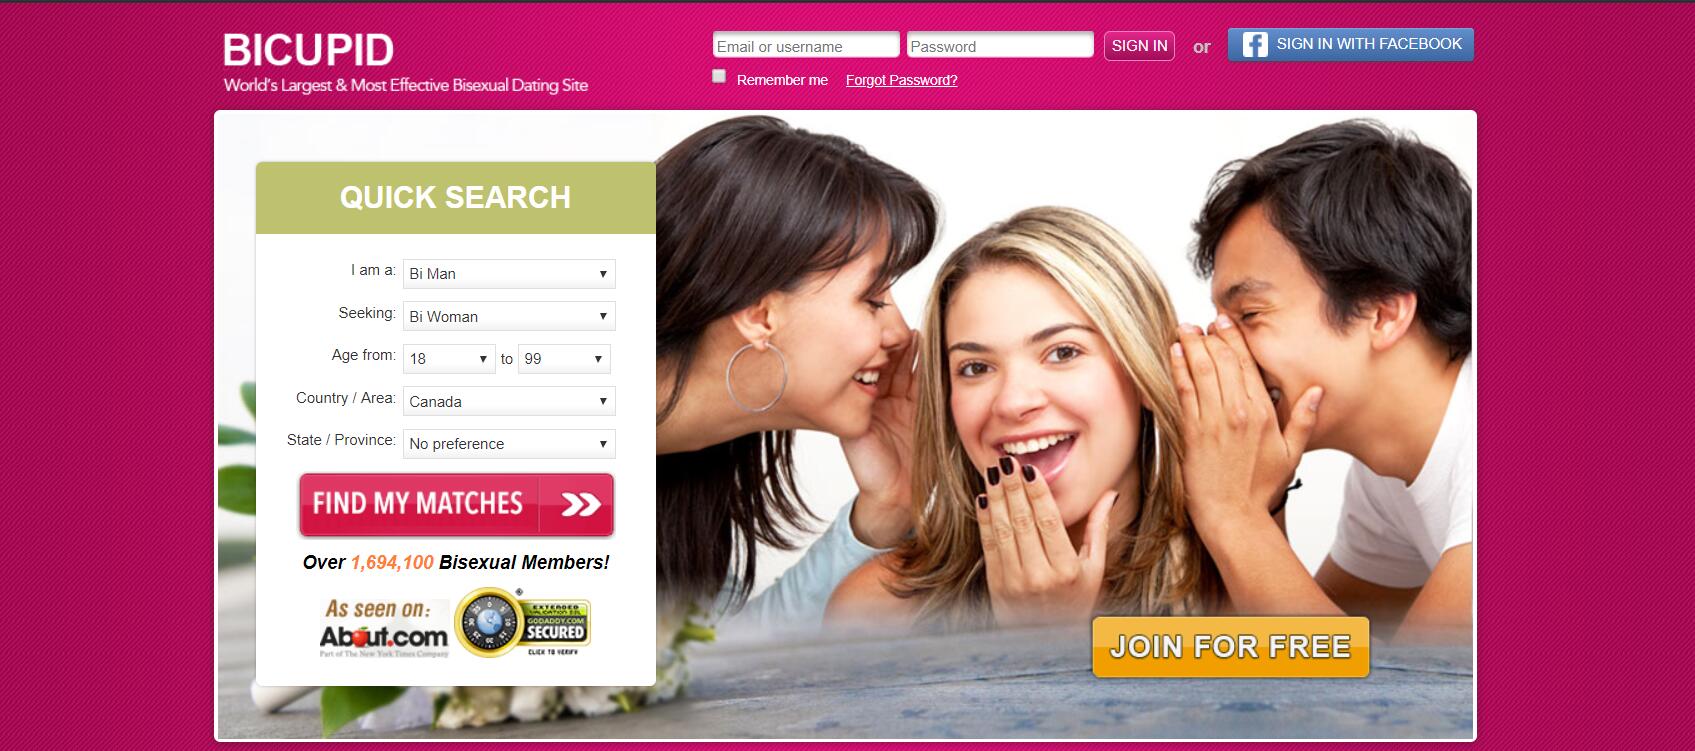 Hiv dating site